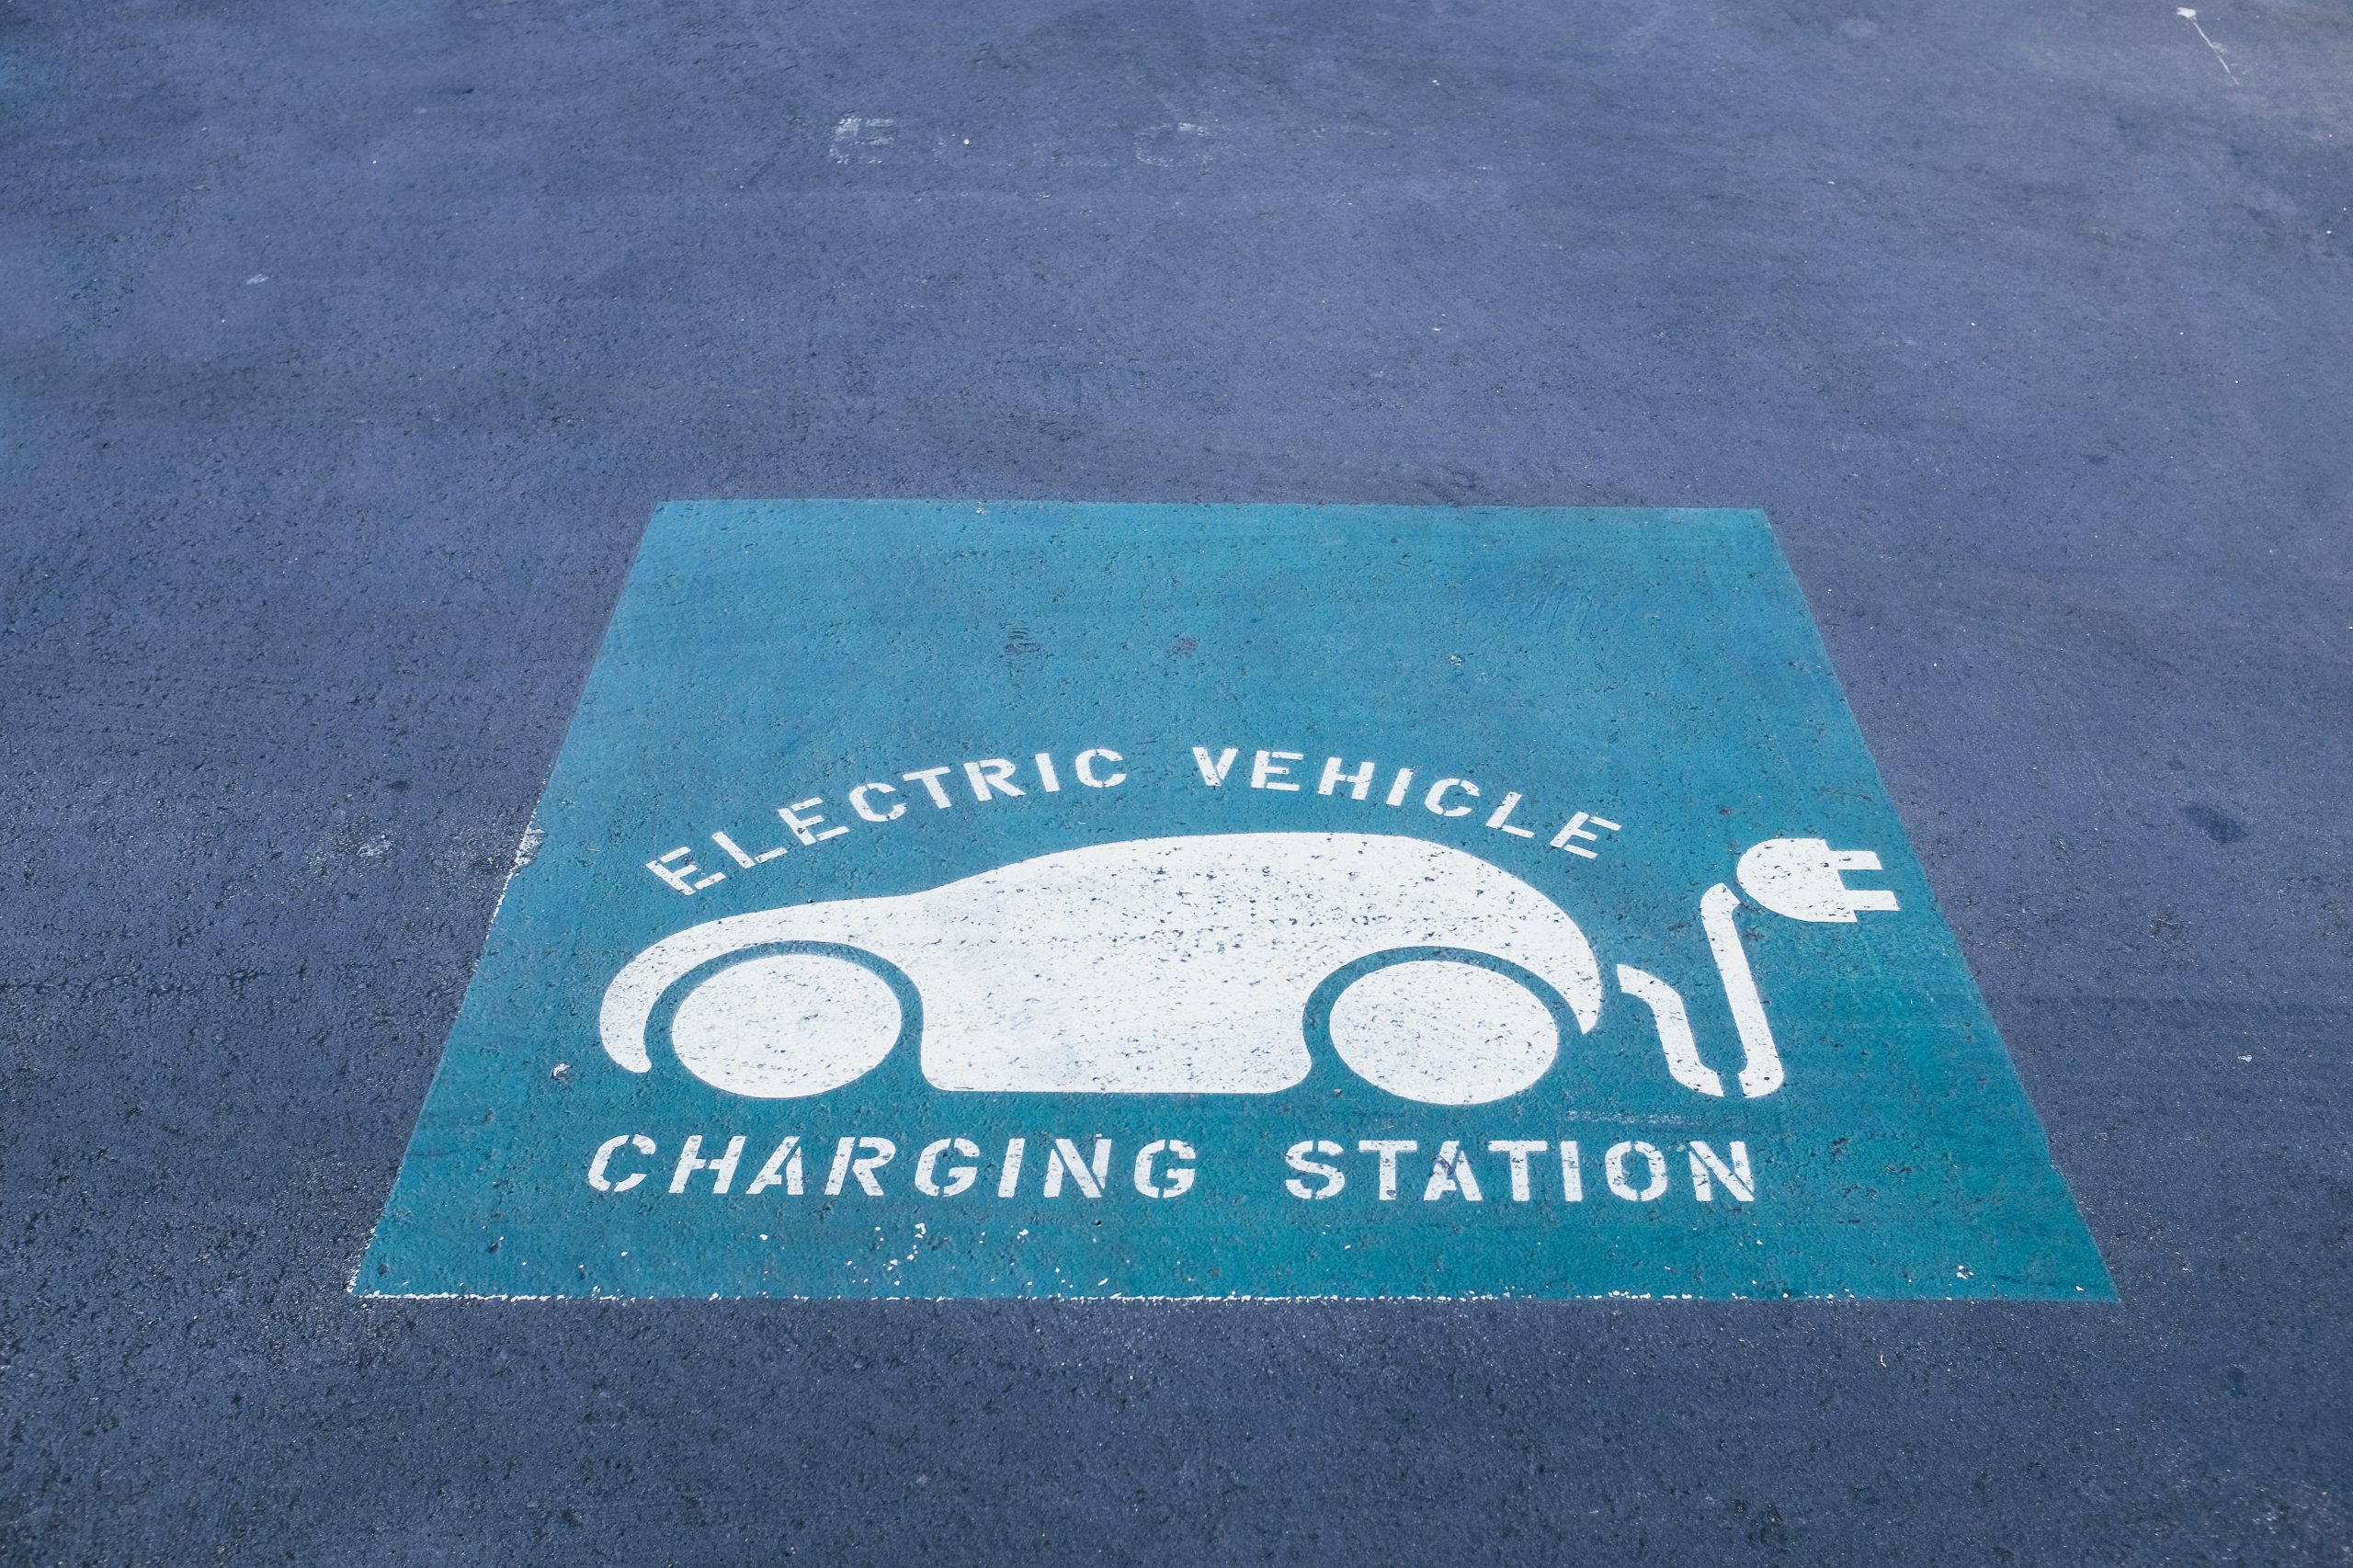 Charging Stations Infrastructure in India for Electric Vehicles